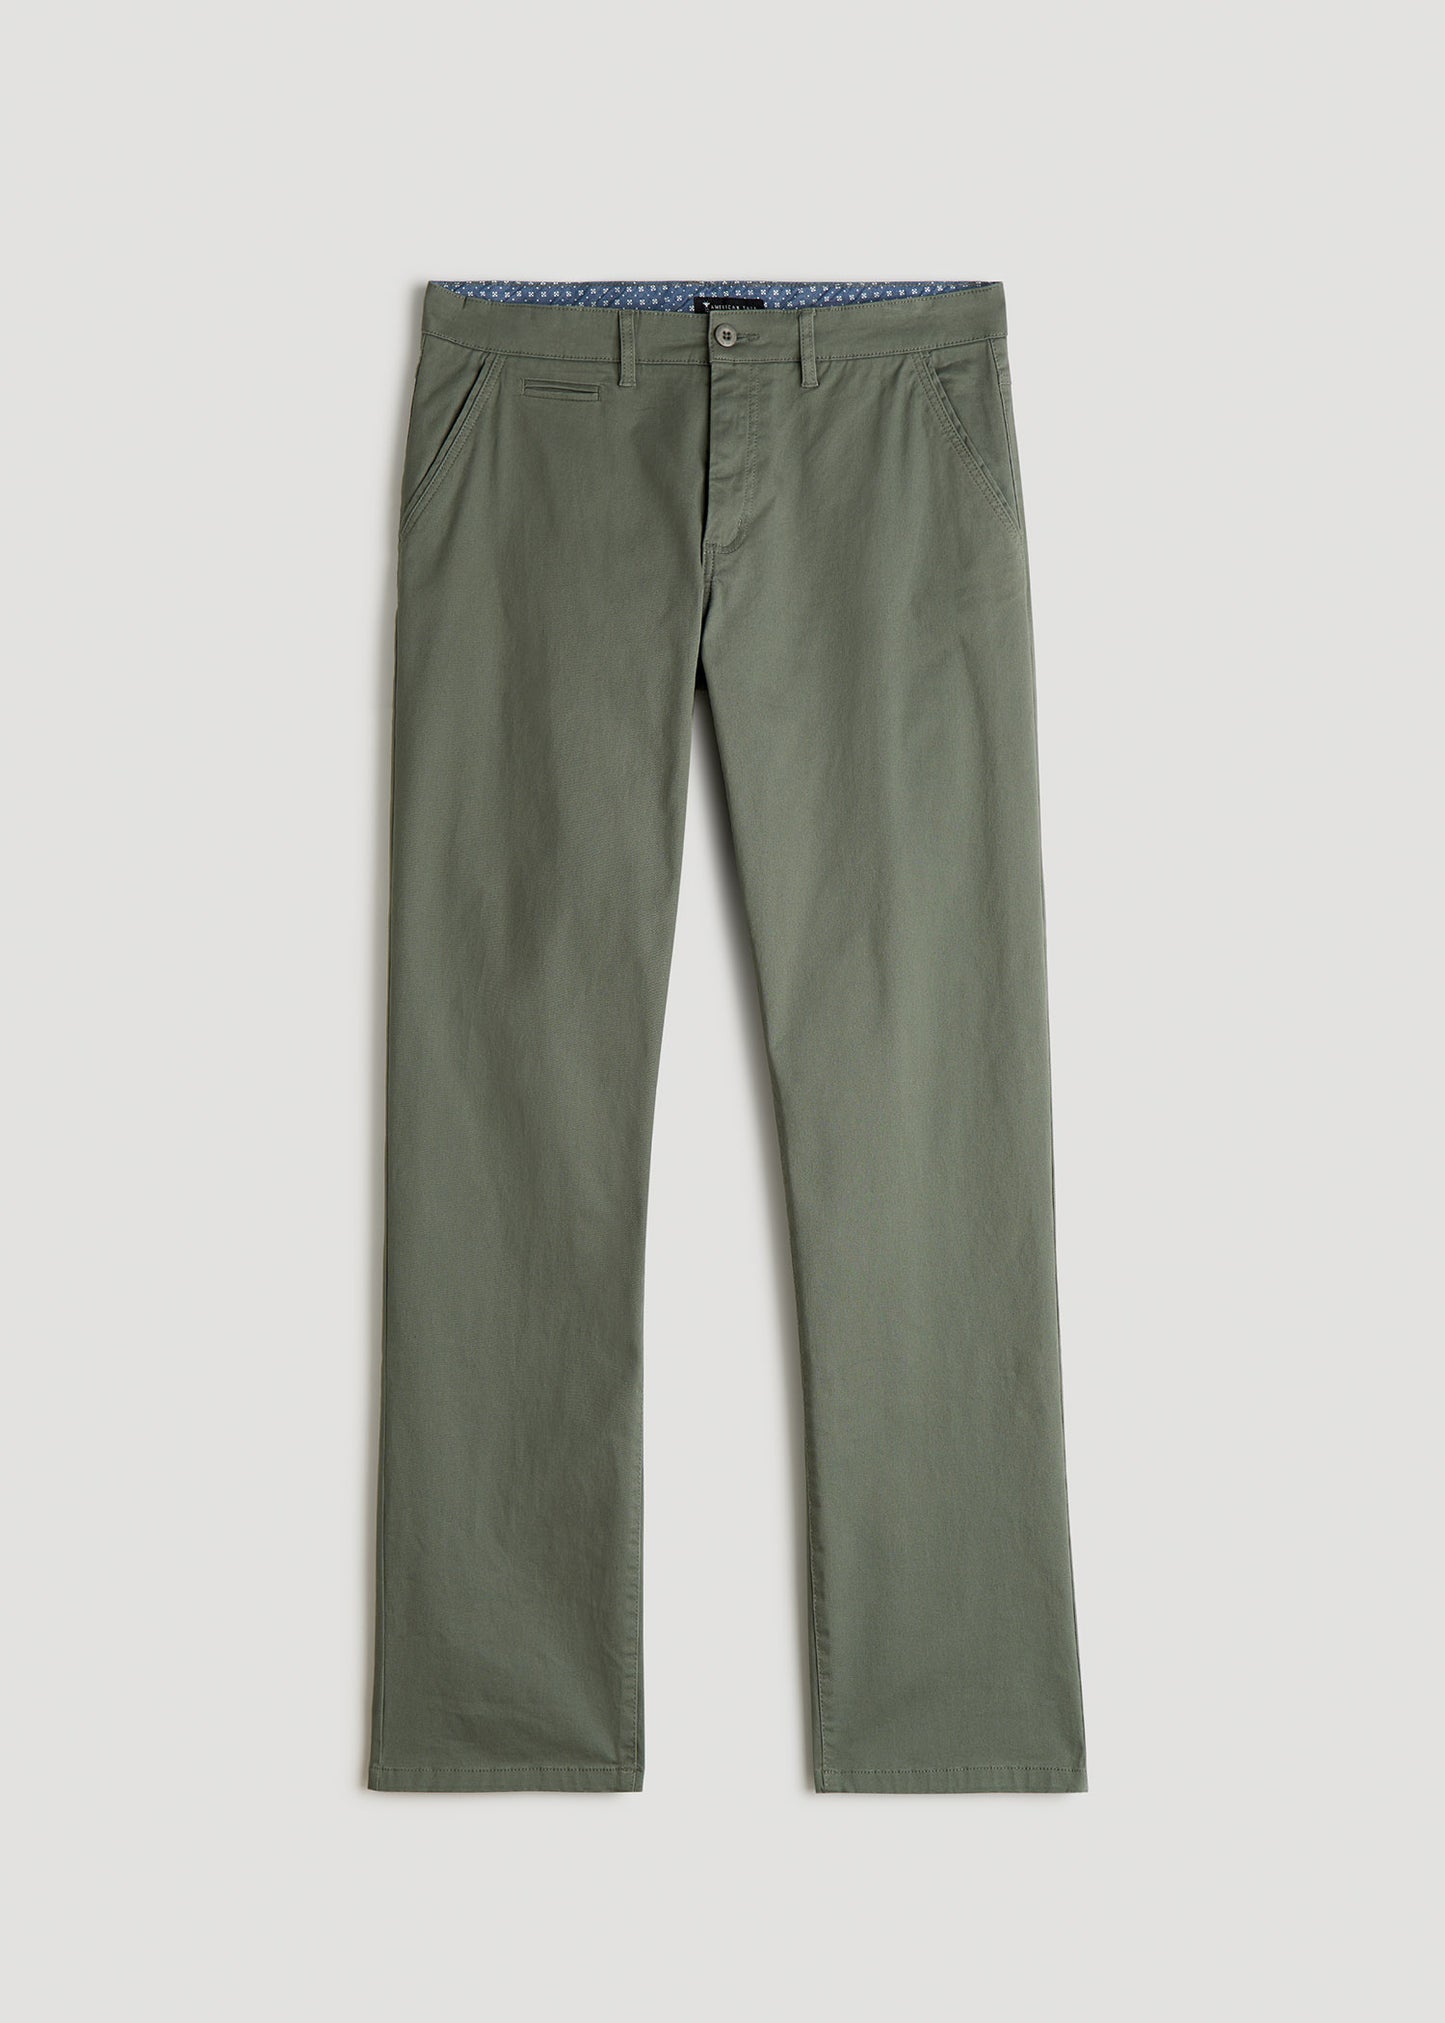 Mason RELAXED Chinos in Marine Navy - Pants for Tall Men